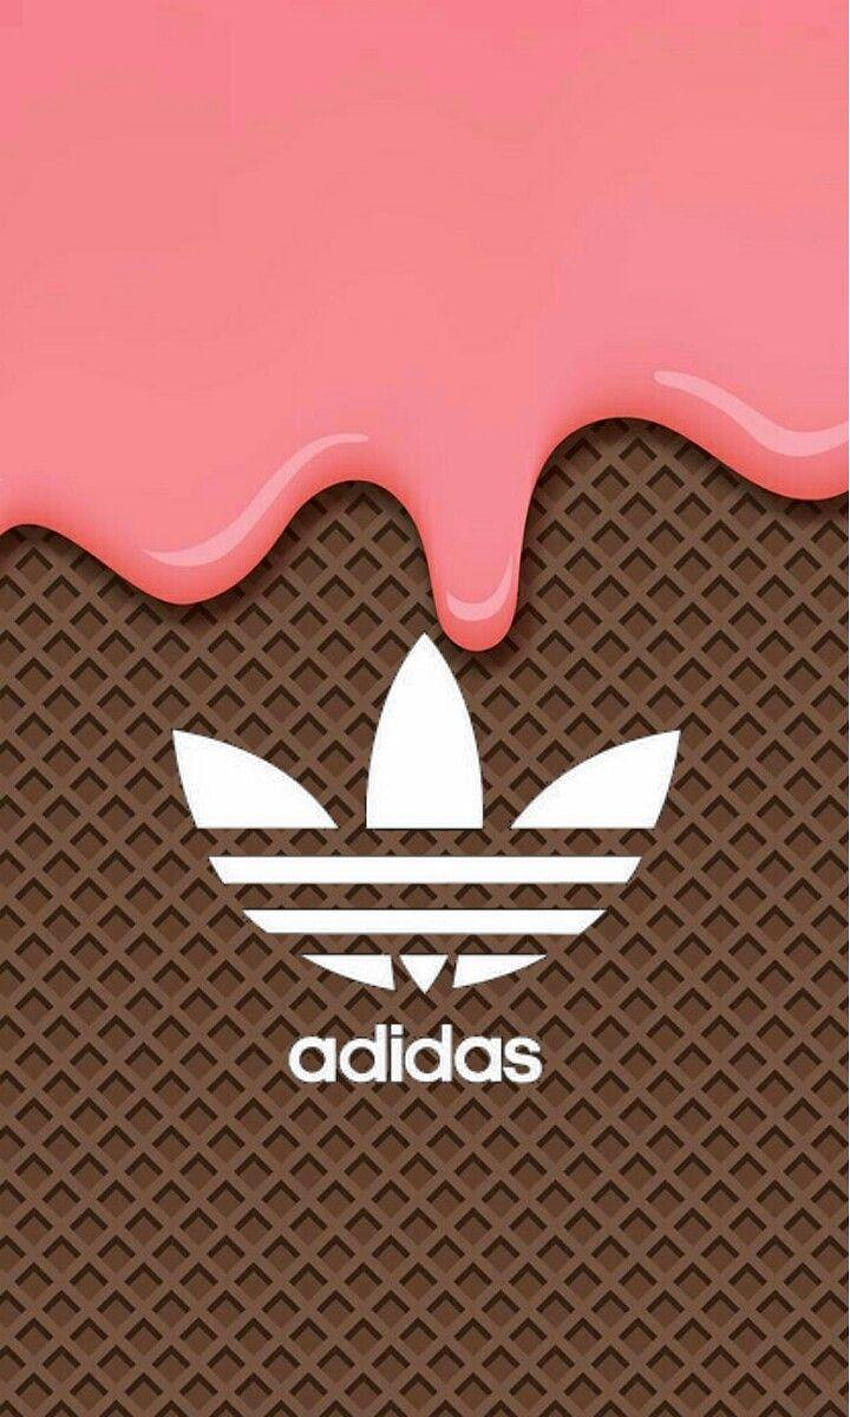 376004 adidas sneakers sports 4k  Rare Gallery HD Wallpapers